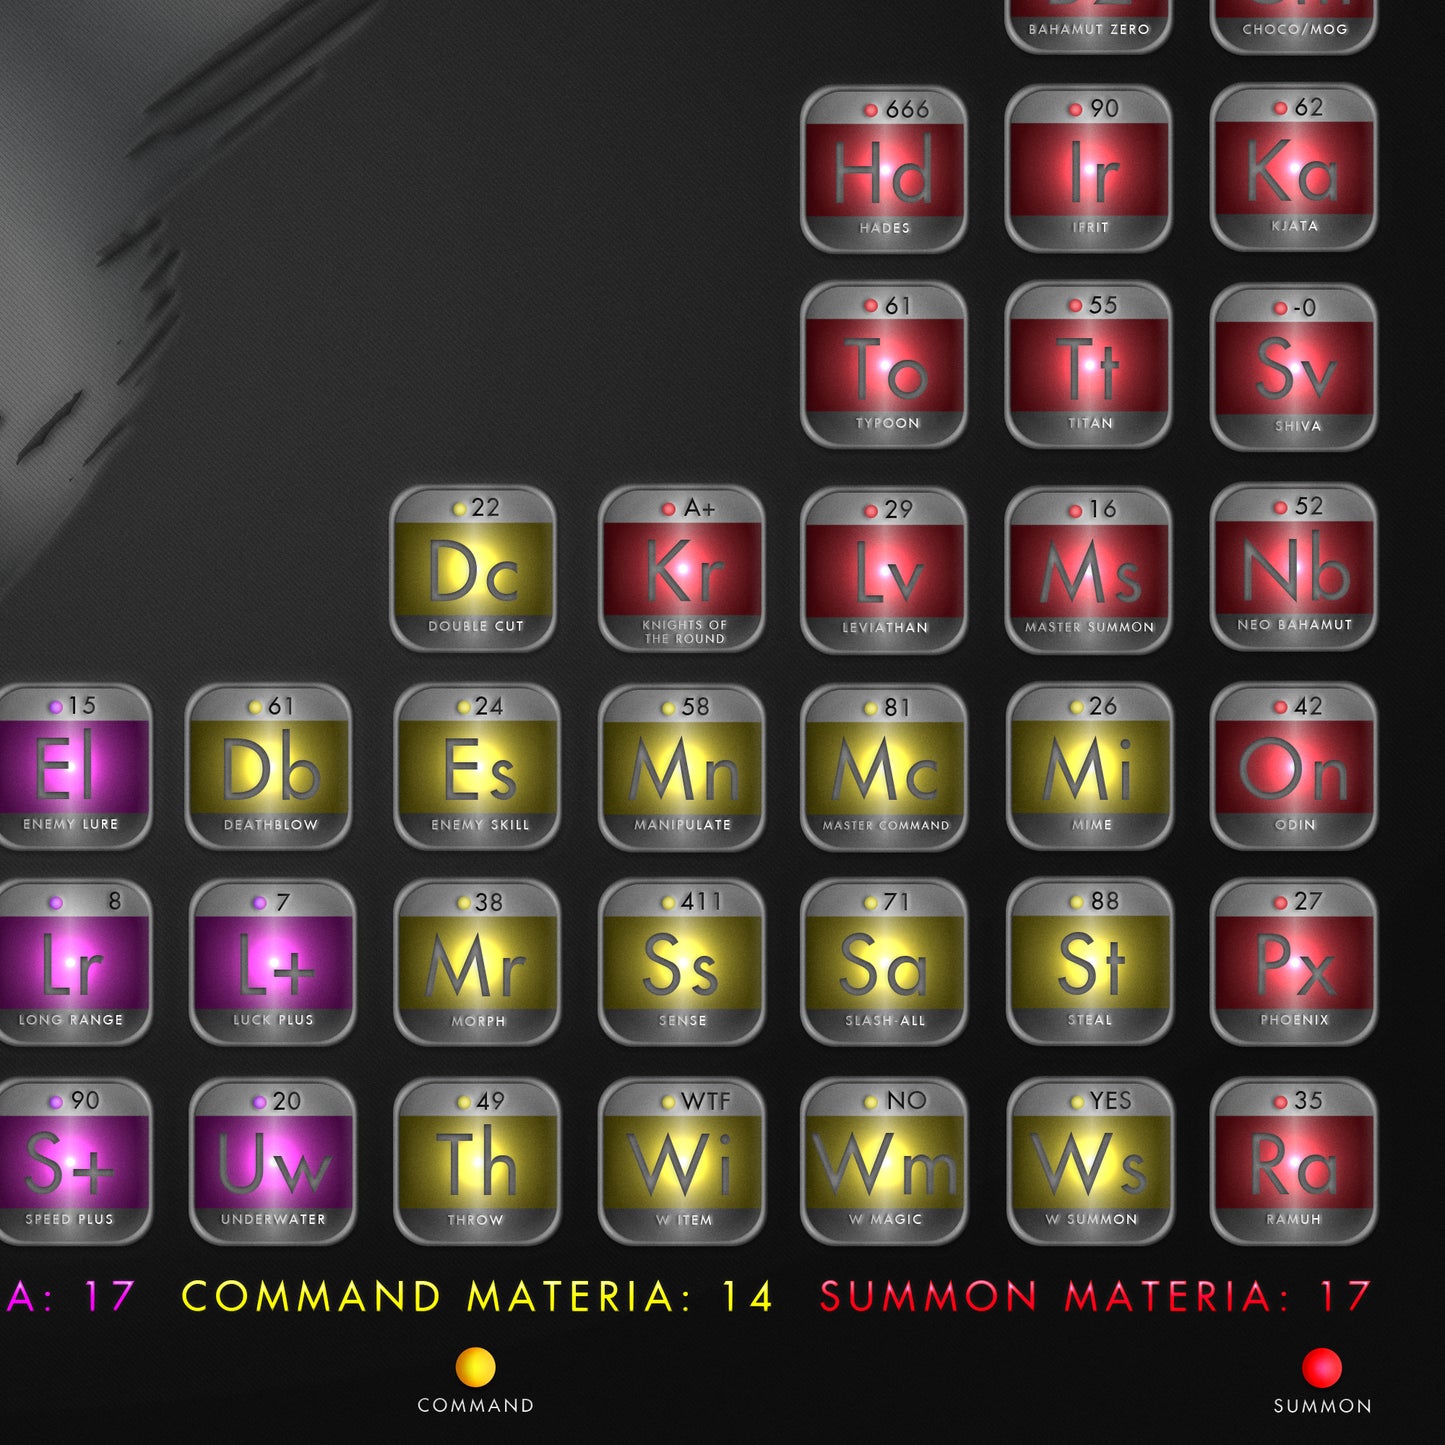 Materia Table of Elements